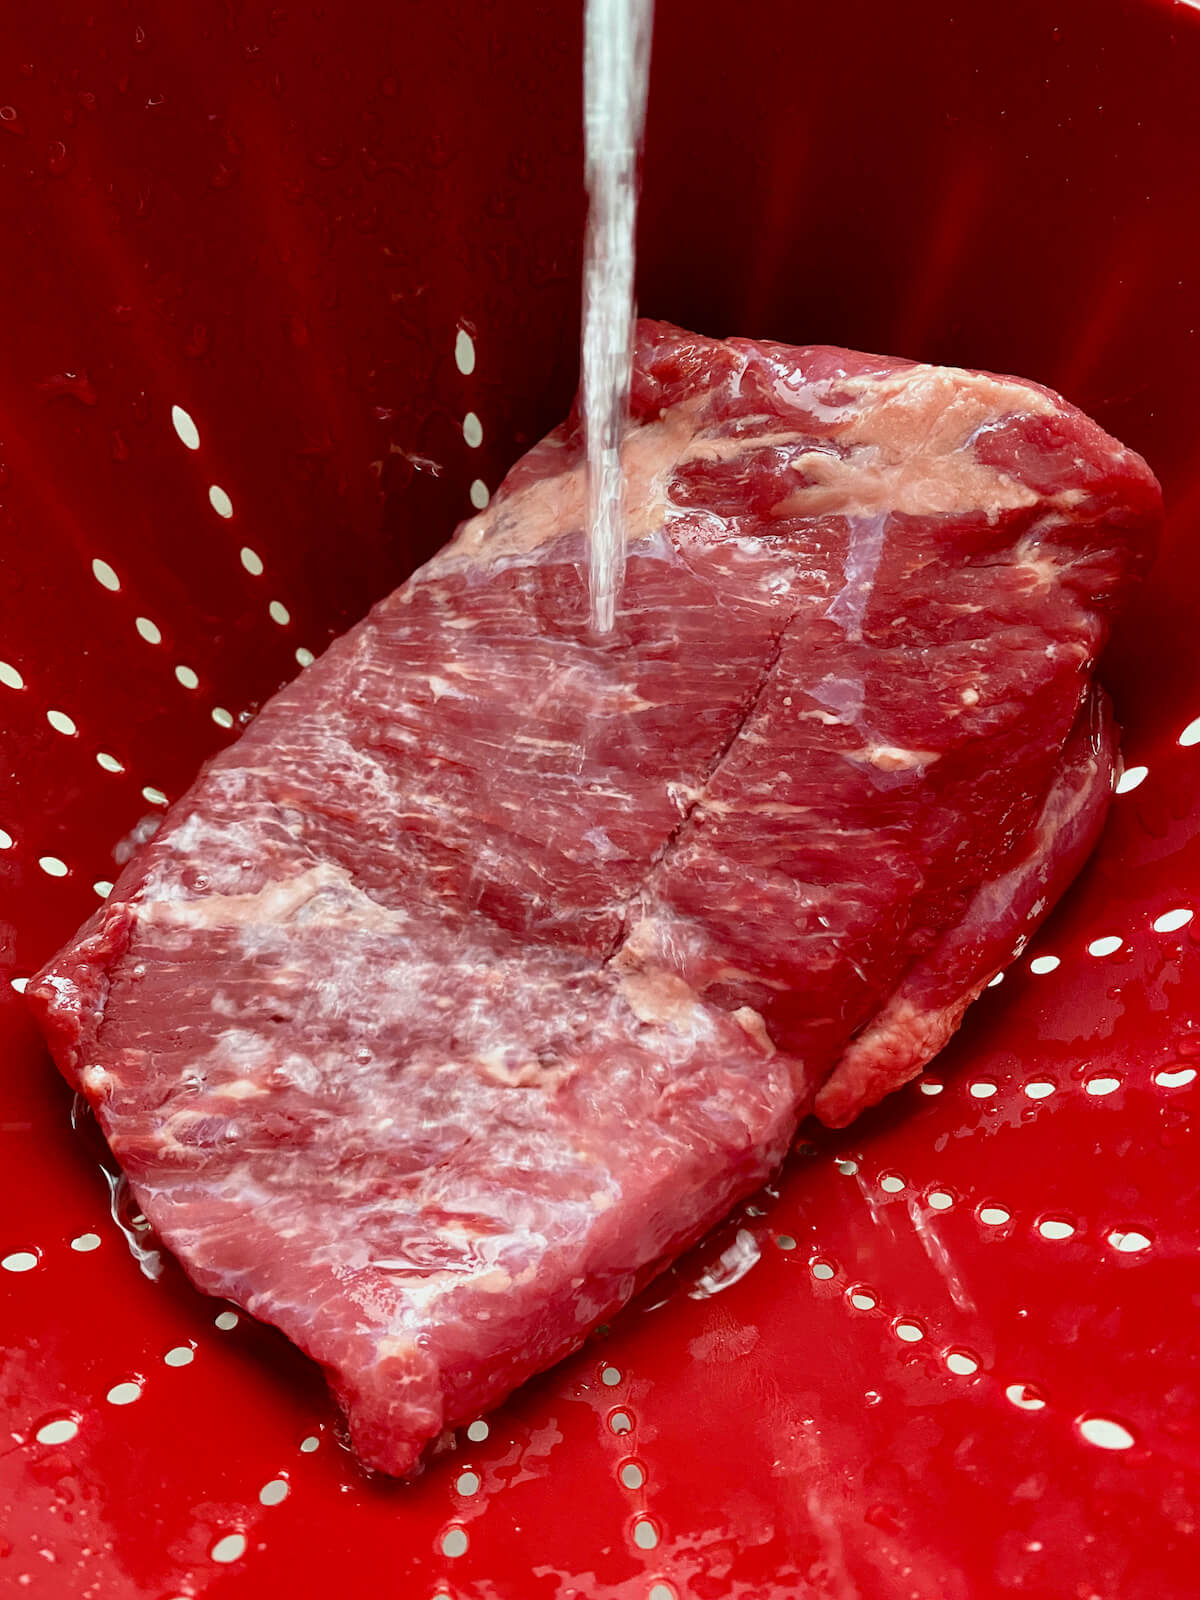 Corned beef being rinsed under running water in a red colander.